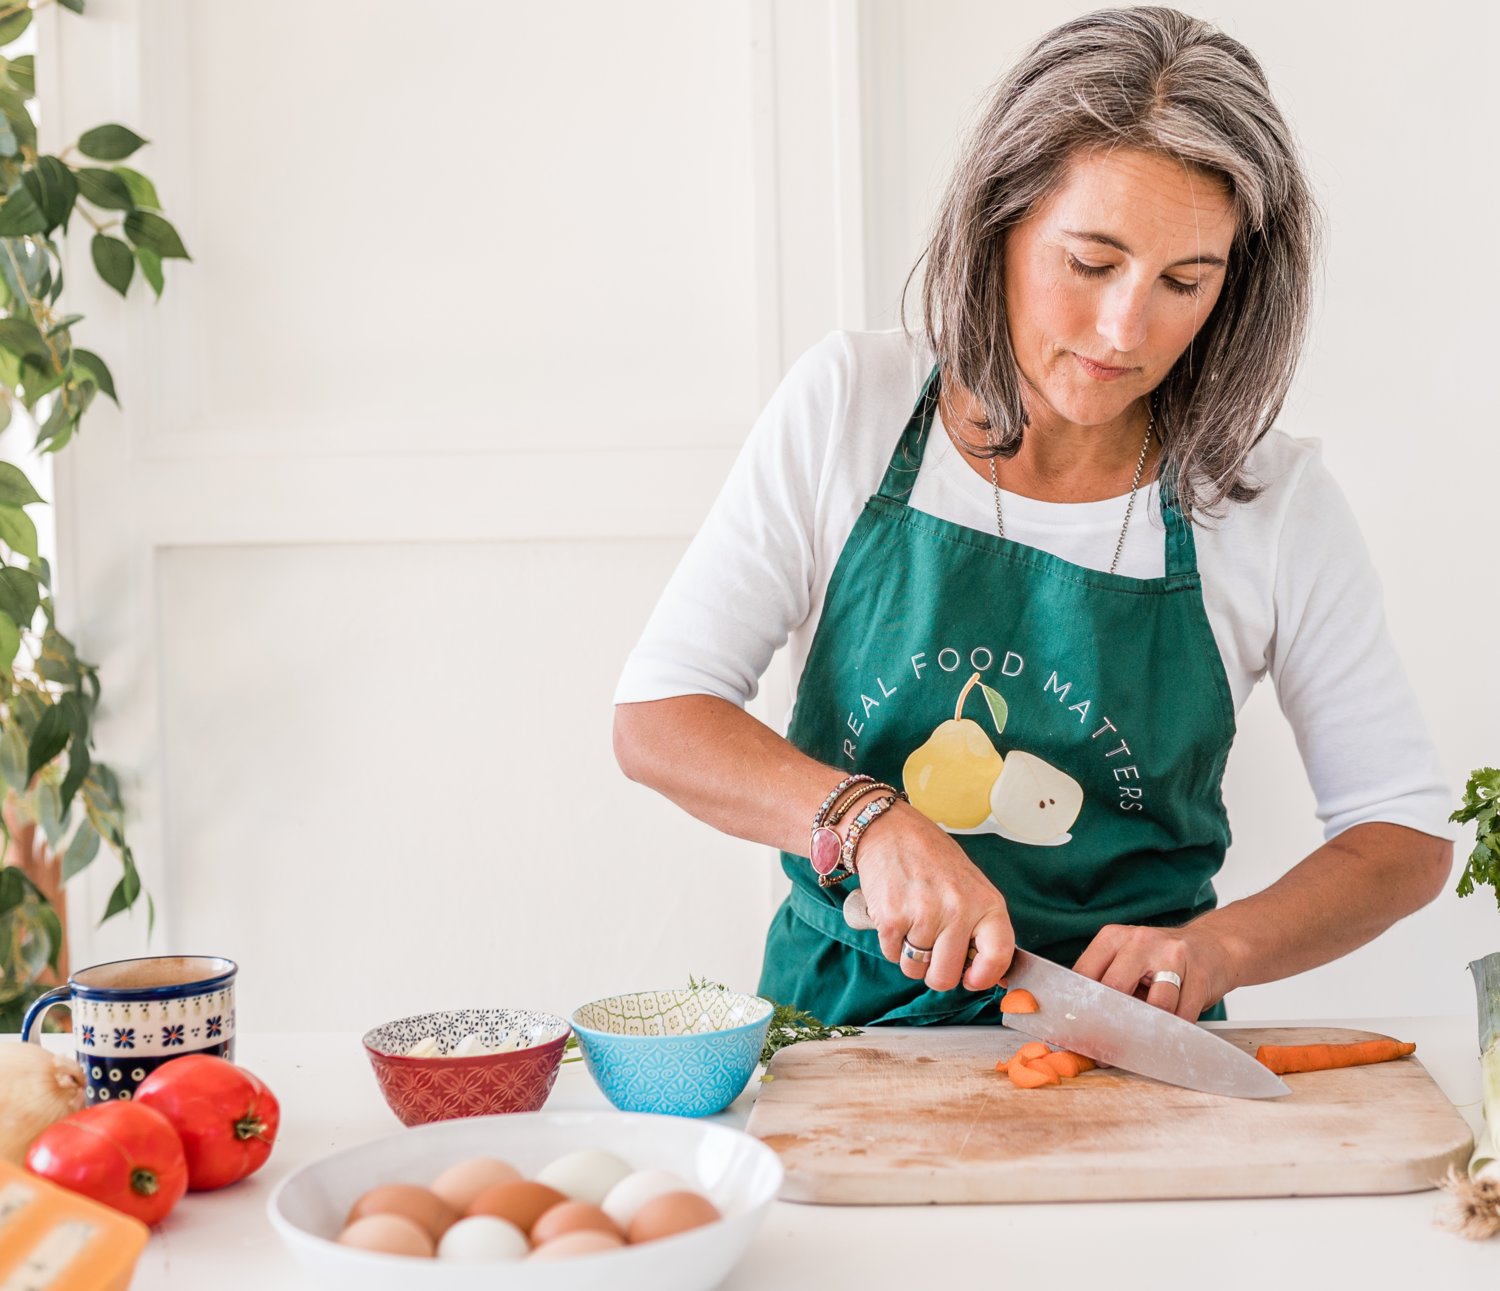 Karen Kennedy, a certified nutritionist, prepares a meal to help with chronic health issues.